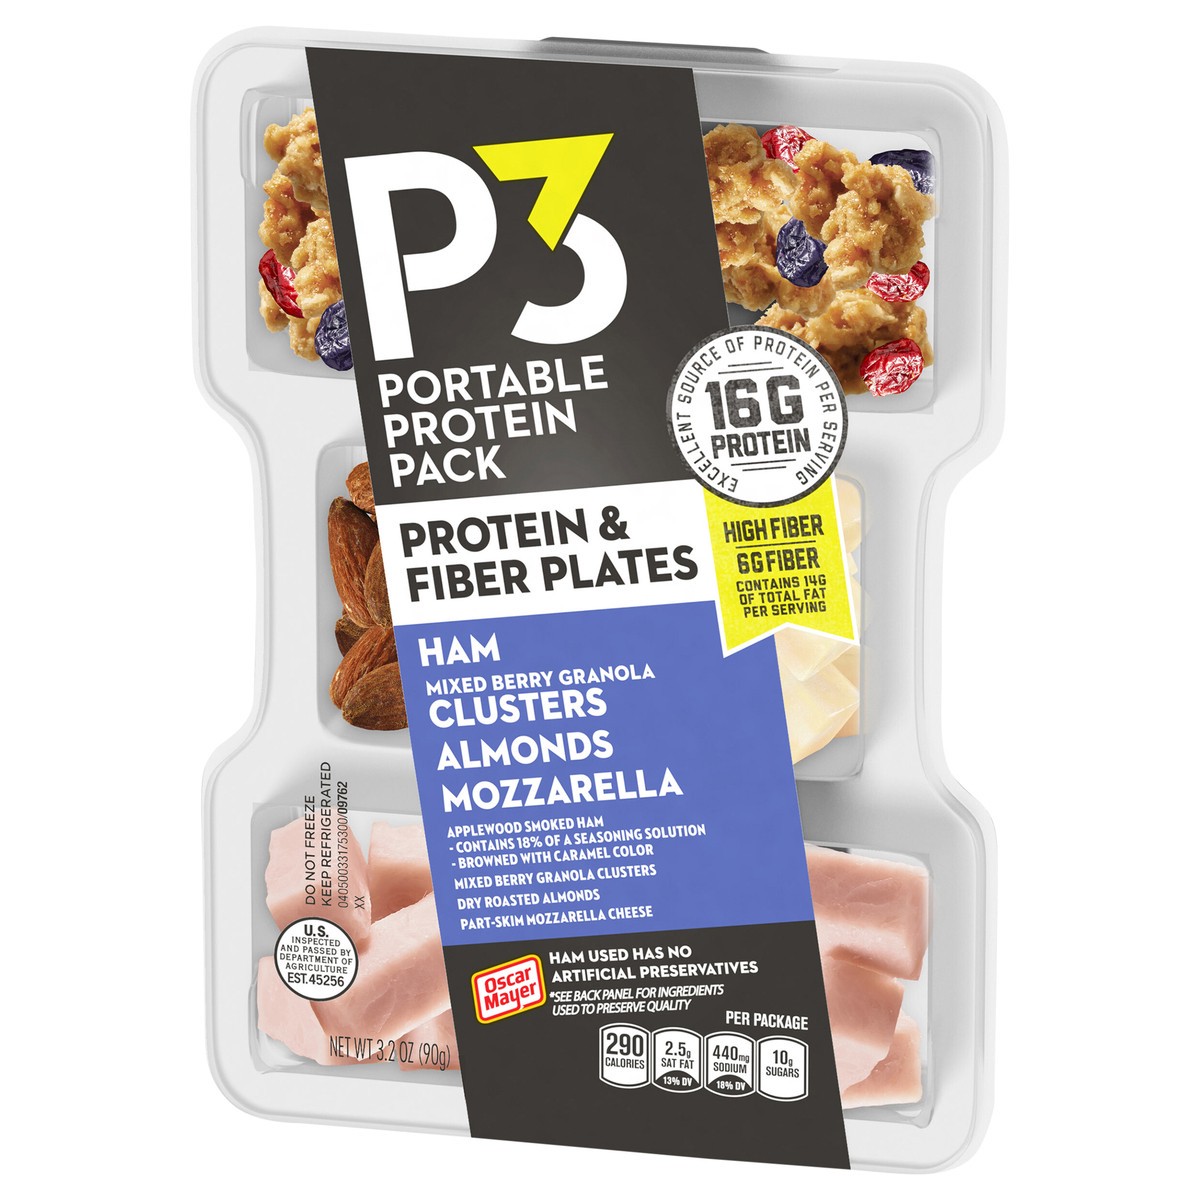 slide 7 of 13, P3 Portable Protein Snack Pack & Fiber Plate with Ham, Mixed Berry Granola Clusters, Almonds & Mozzarella Cheese, 3.2 oz Tray, 3.2 oz